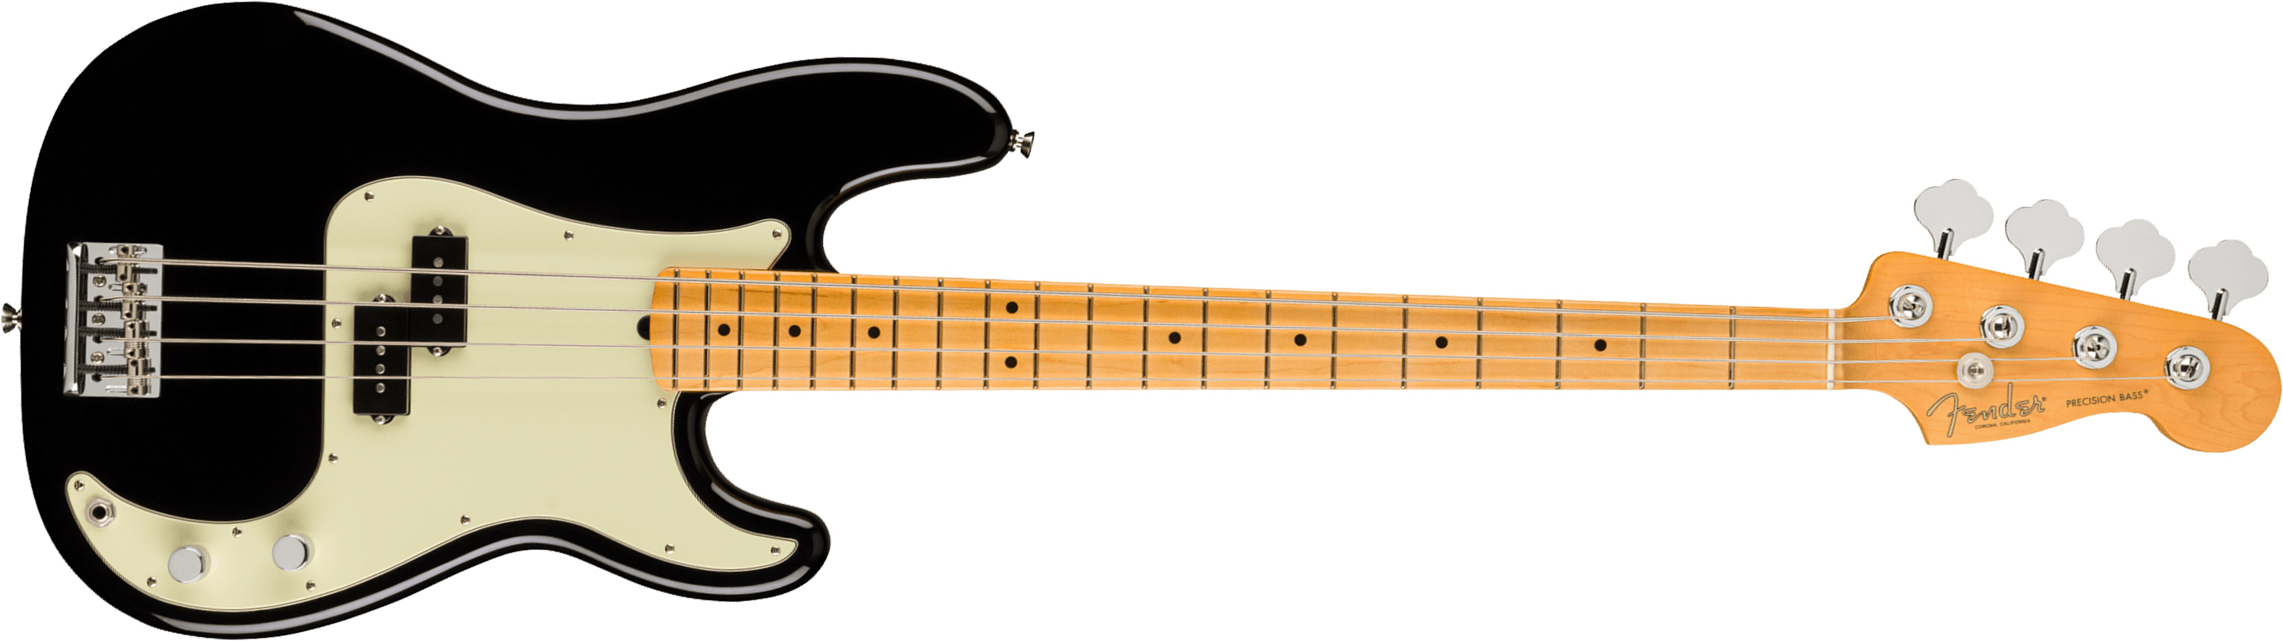 Fender Precision Bass American Professional Ii Usa Mn - Black - Solid body electric bass - Main picture